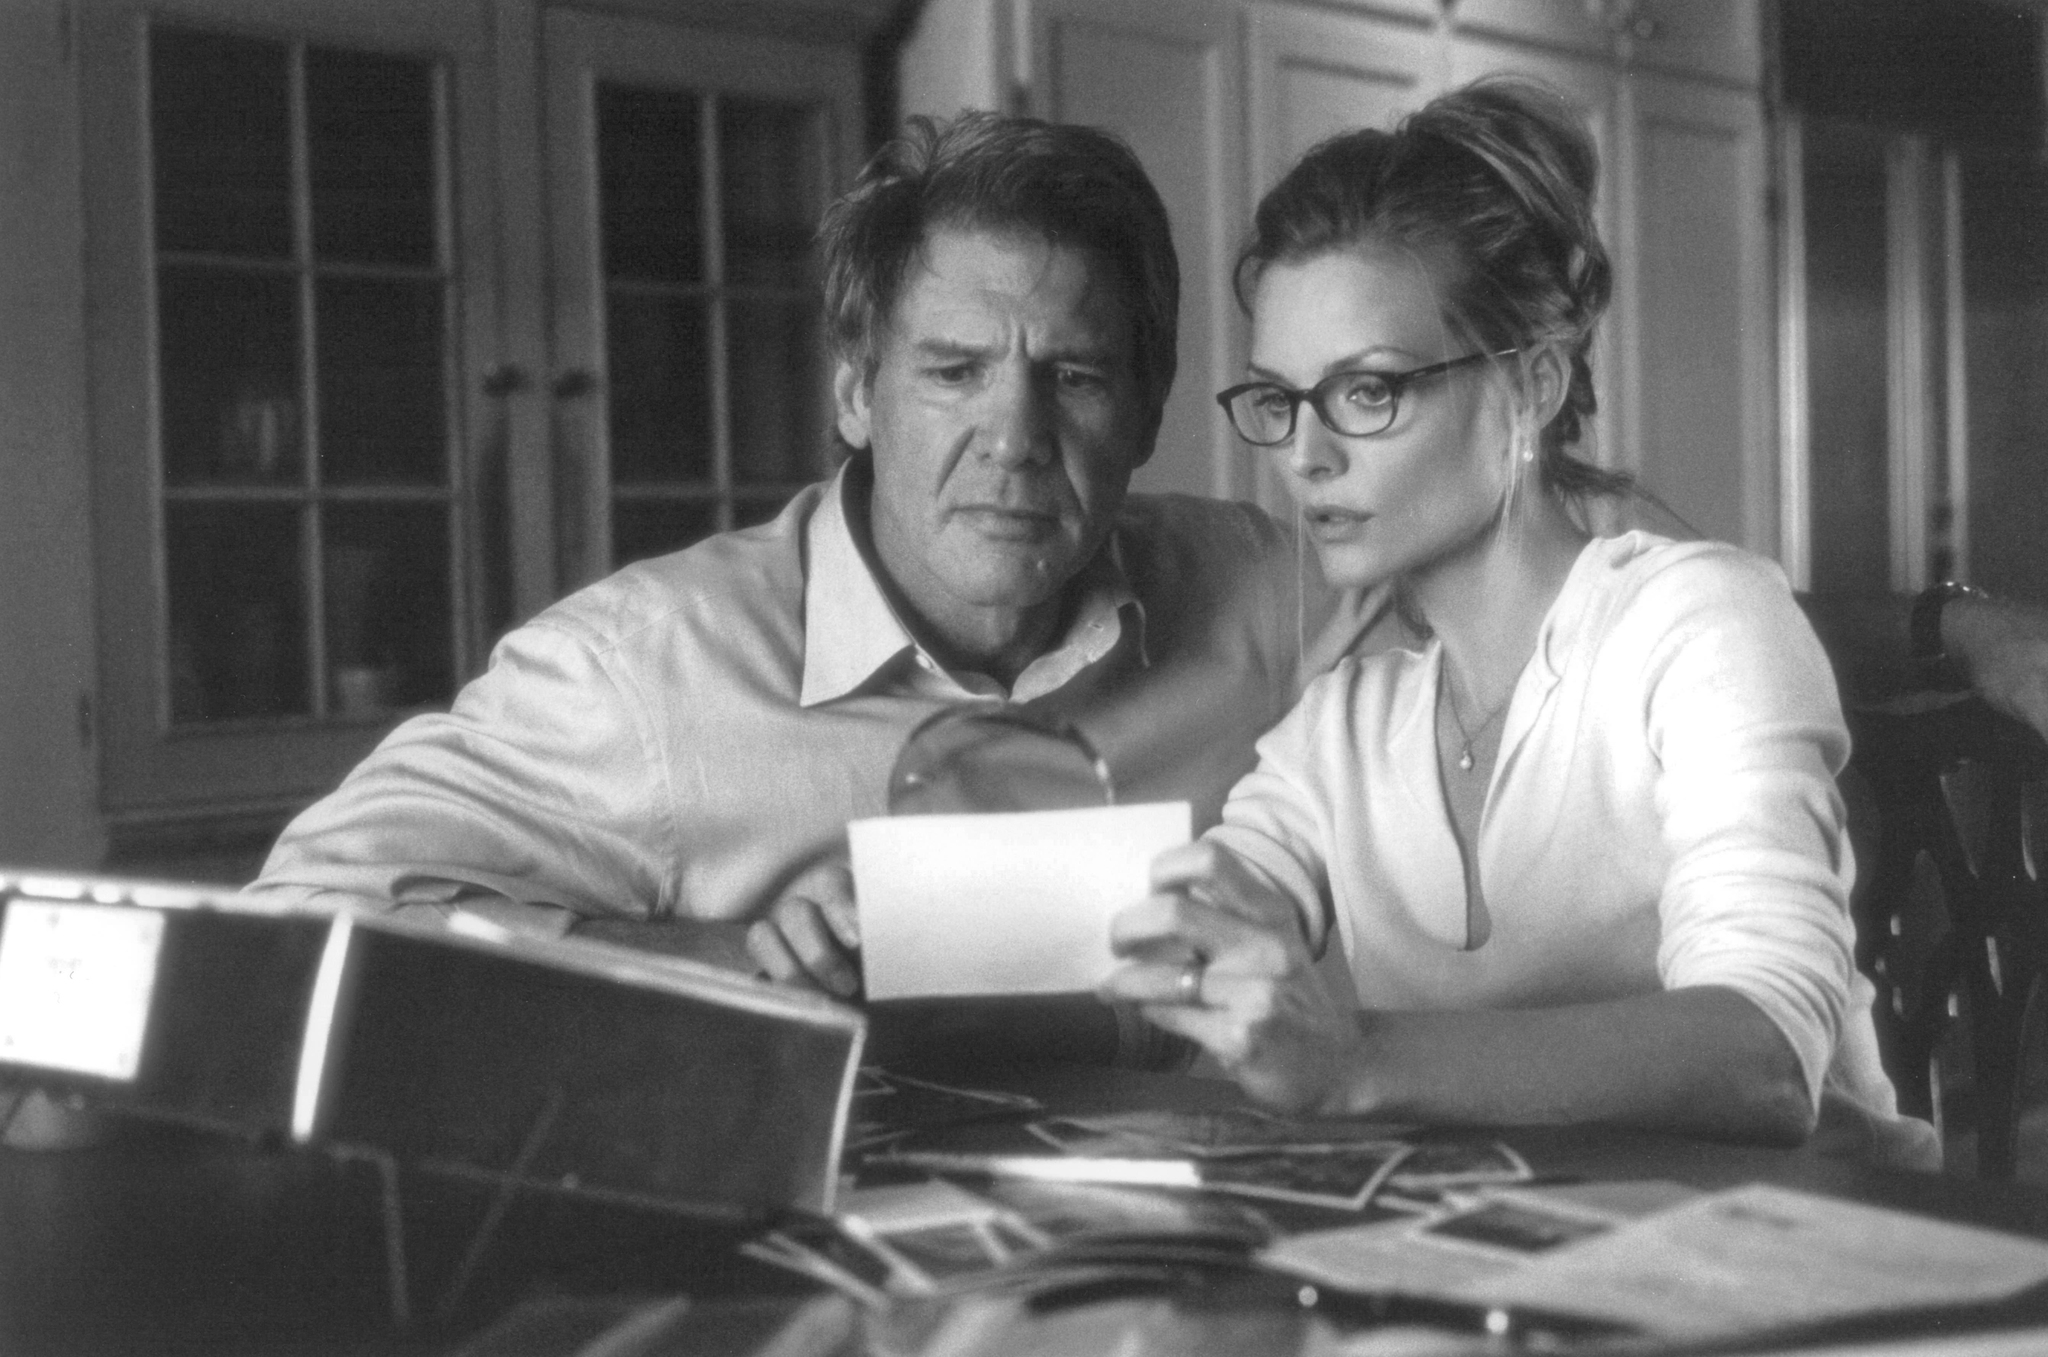 Still of Harrison Ford and Michelle Pfeiffer in What Lies Beneath (2000)